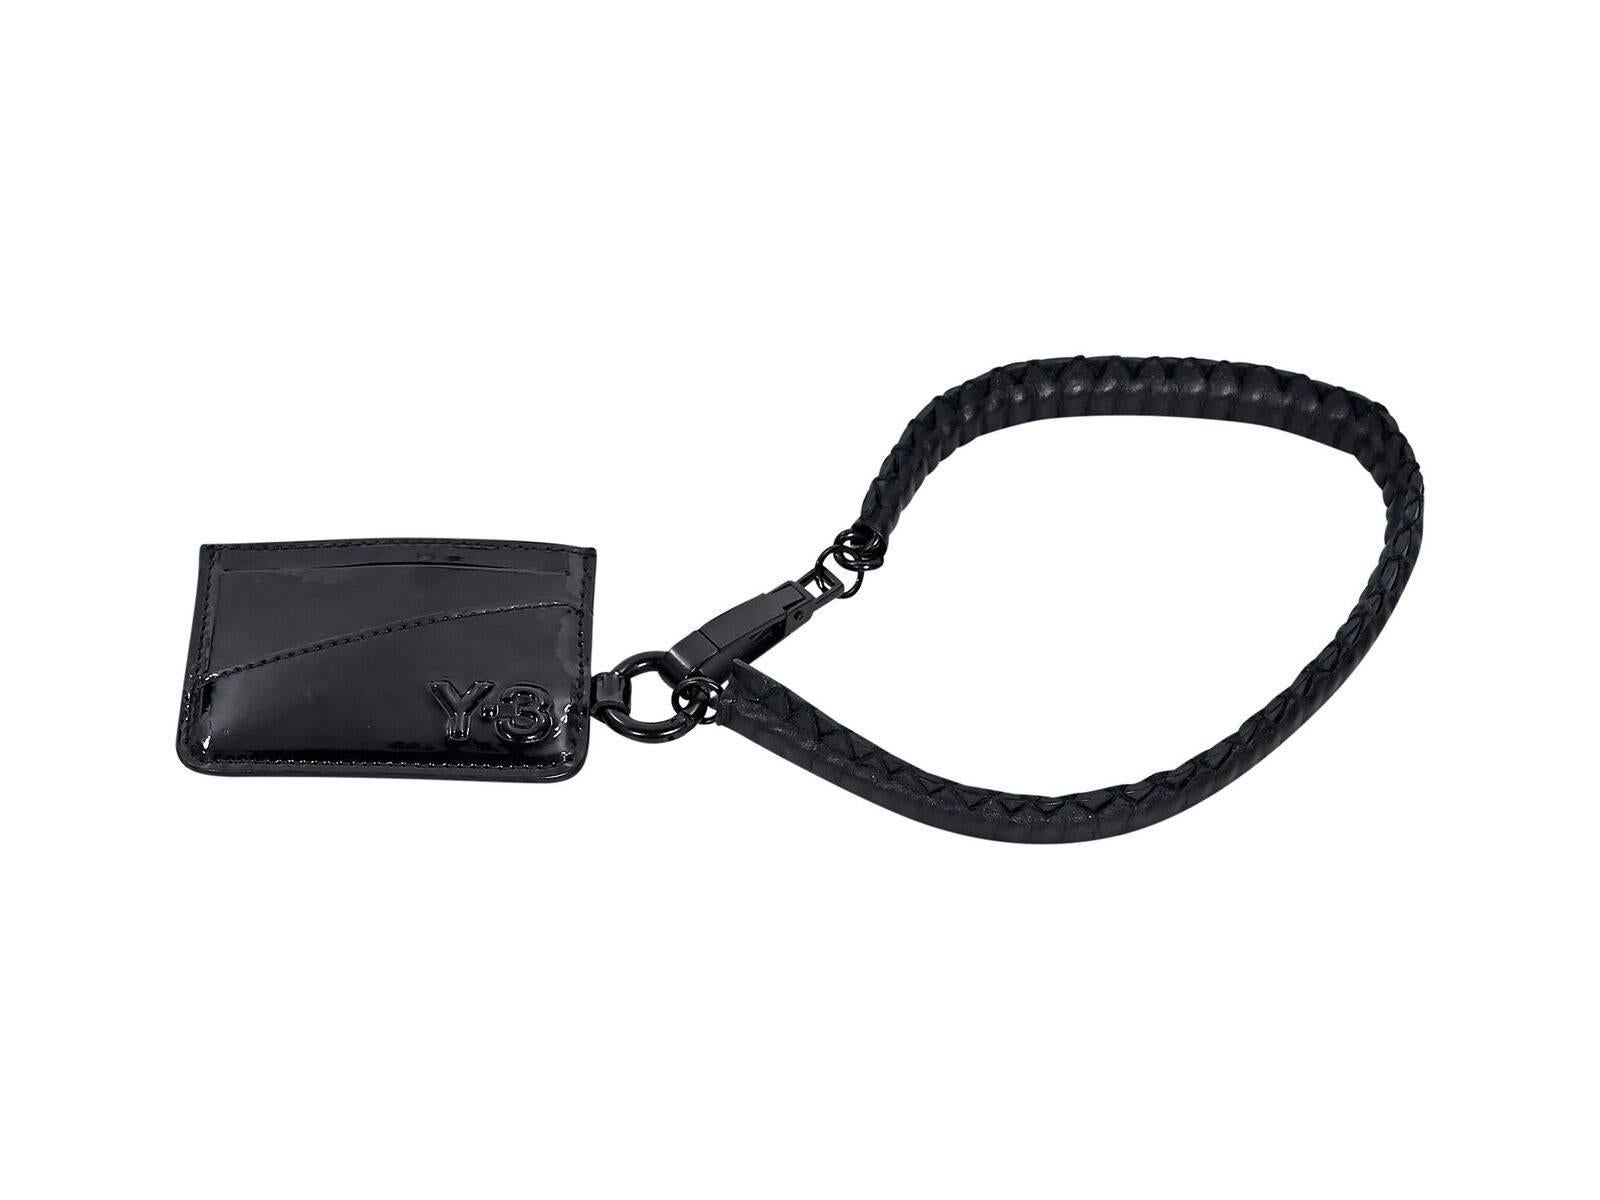 Product details:  Black patent leather card holder by Y-3.  Push clasp closure.  Black hardware.  4